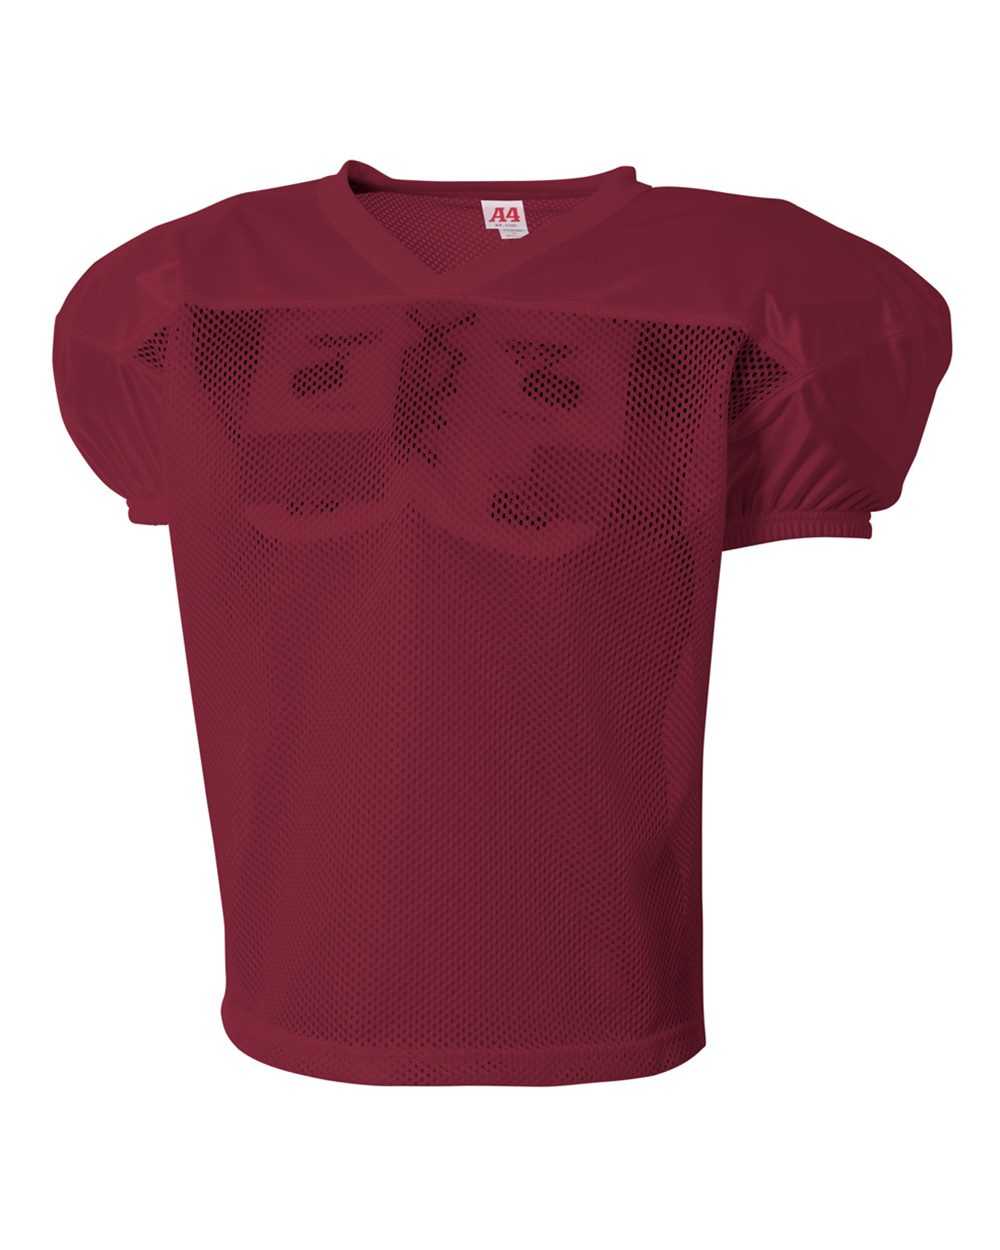 A4 NB4260 Youth Drills Practice Jersey - Maroon - HIT a Double